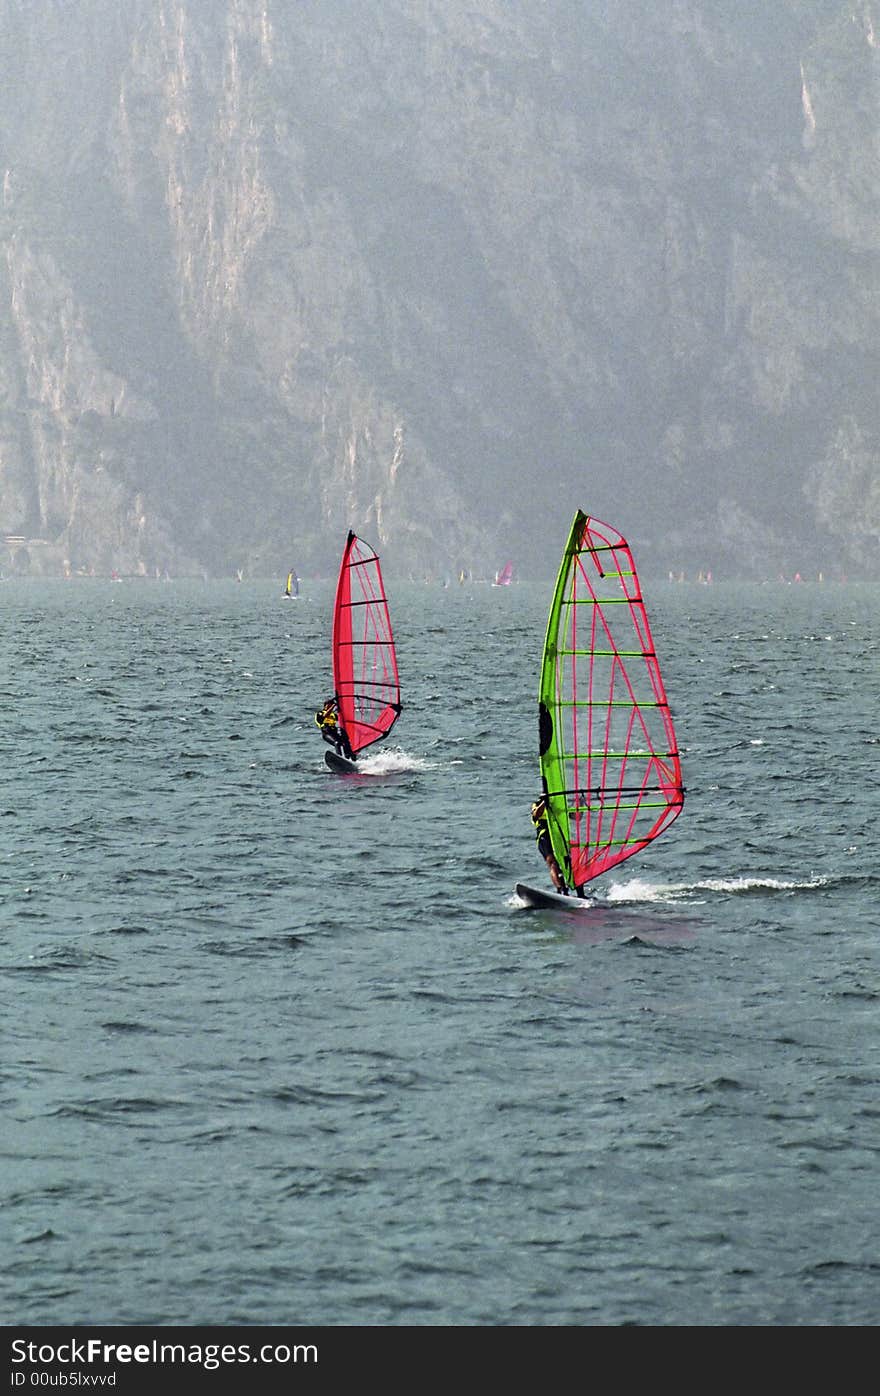 Two wind surfers on Lake Garda, Italy. Two wind surfers on Lake Garda, Italy.